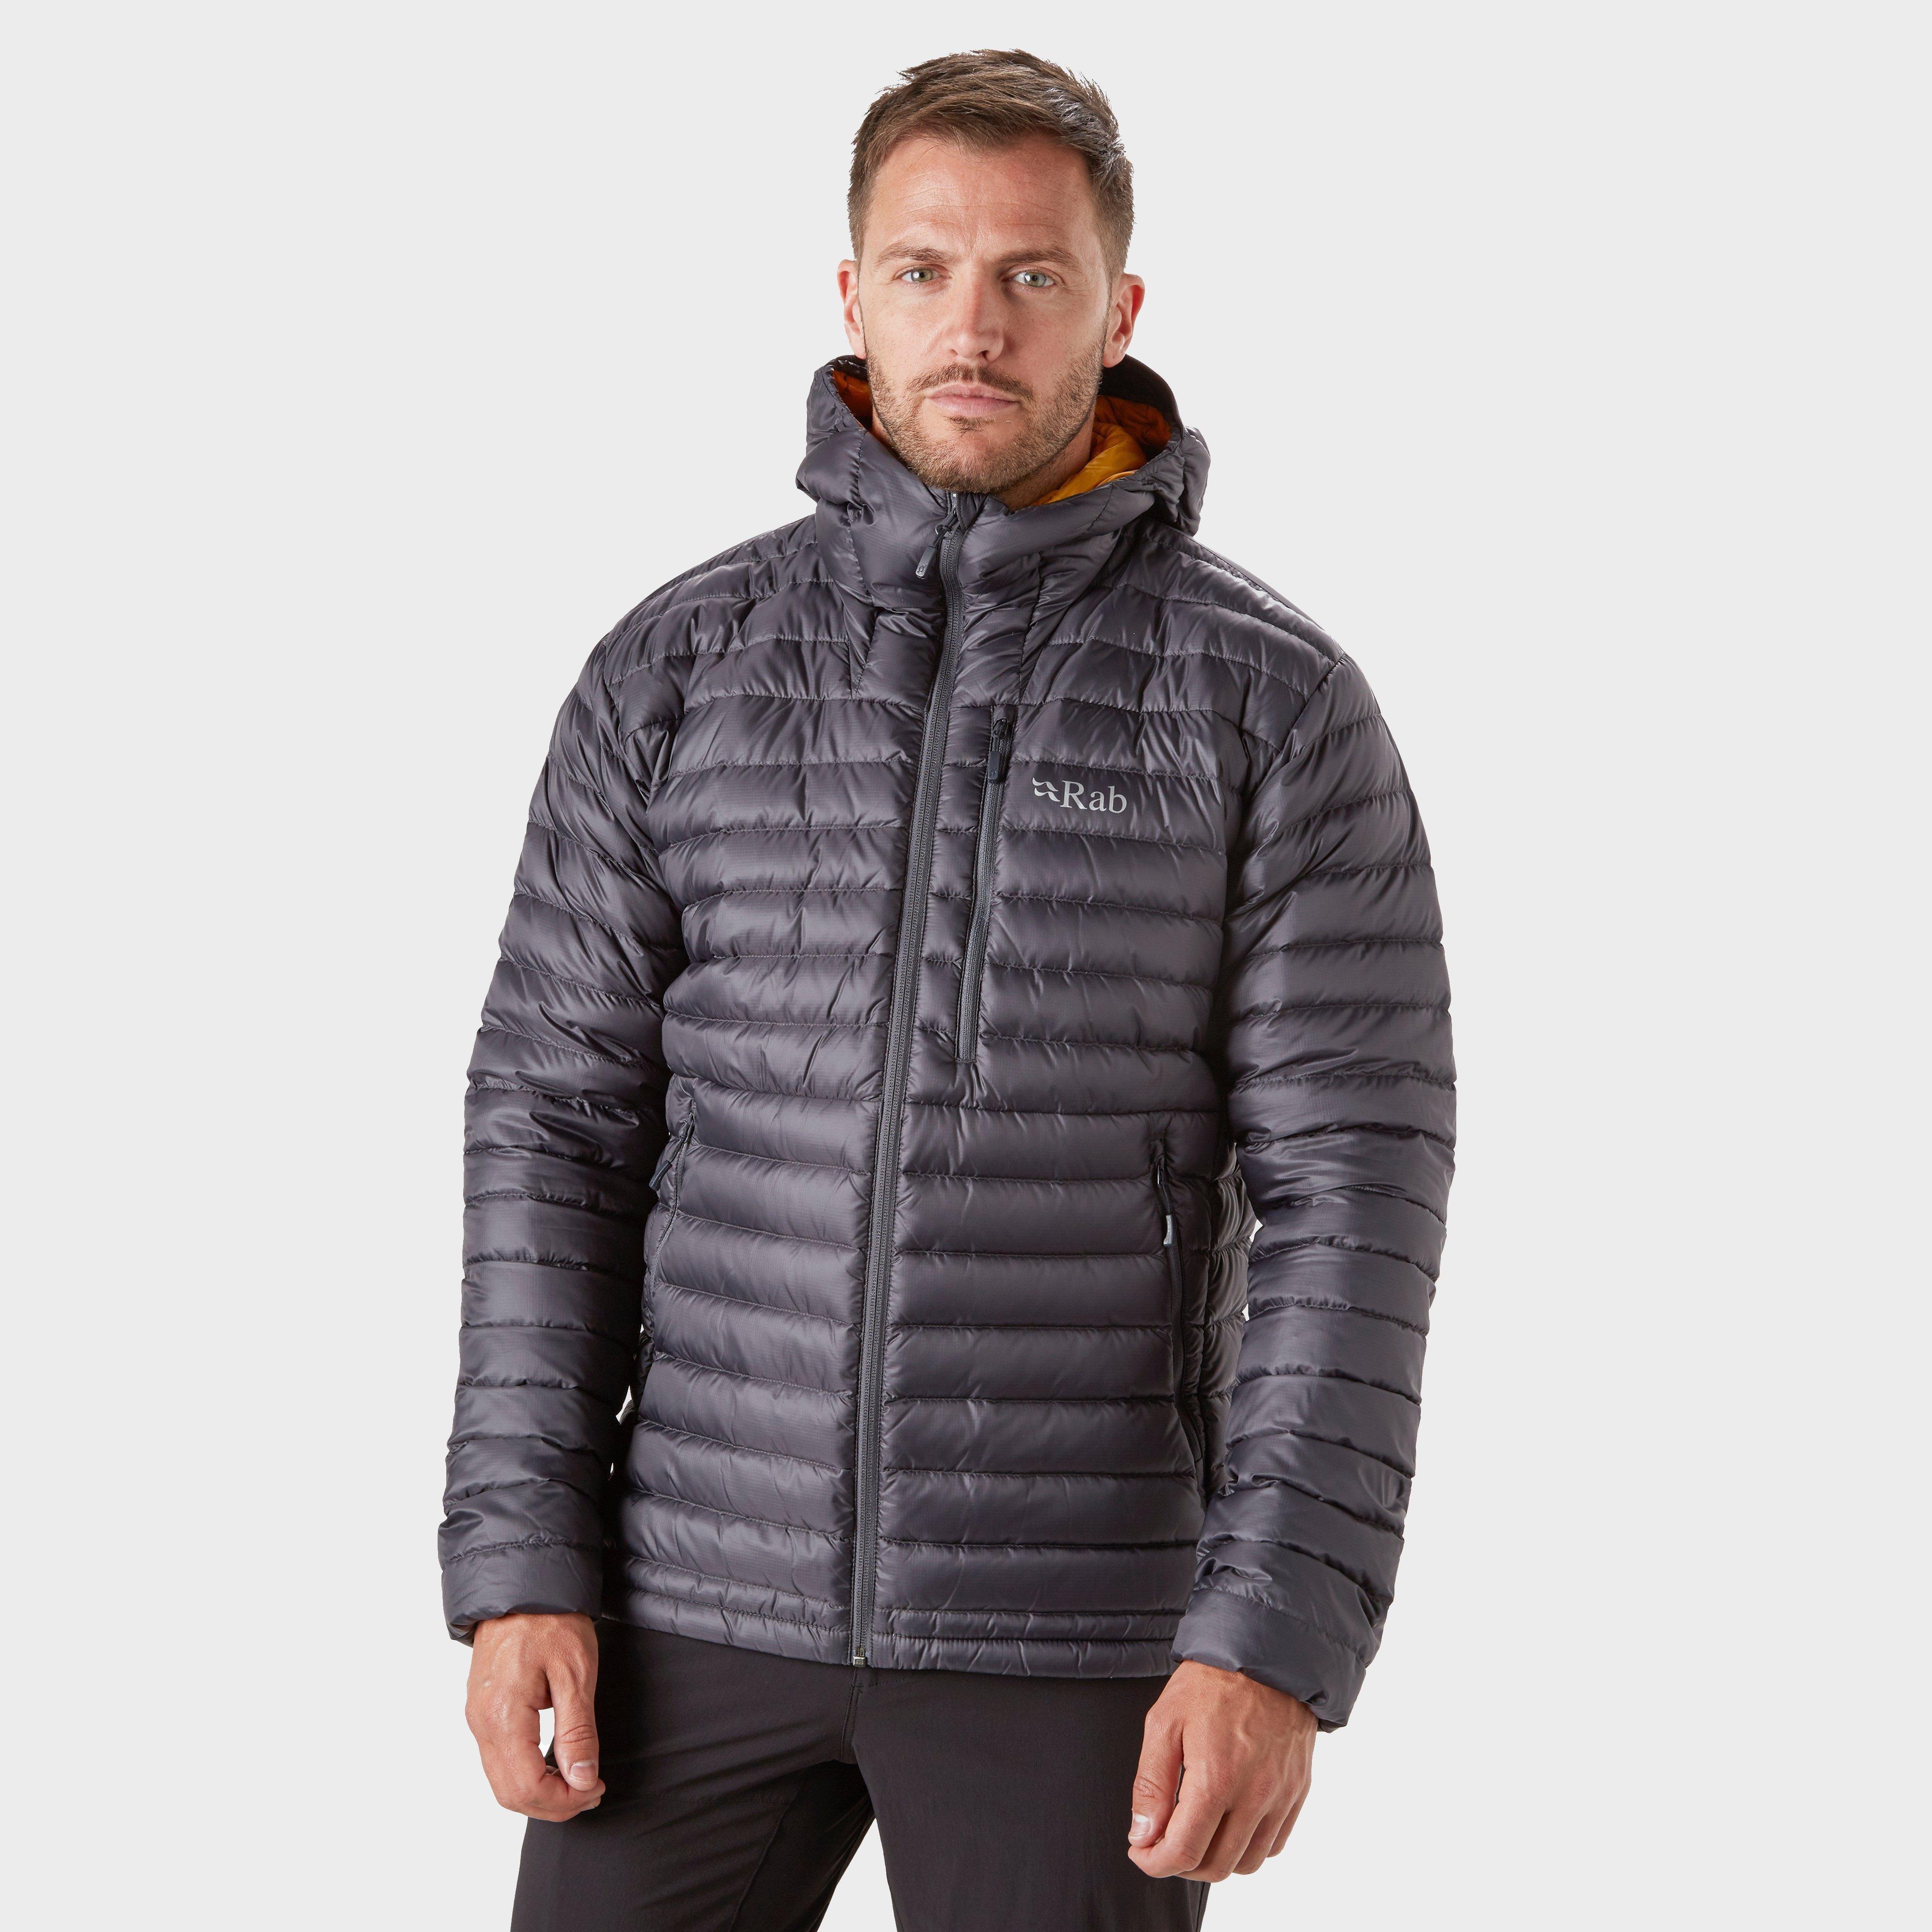 north face jacket go outdoors